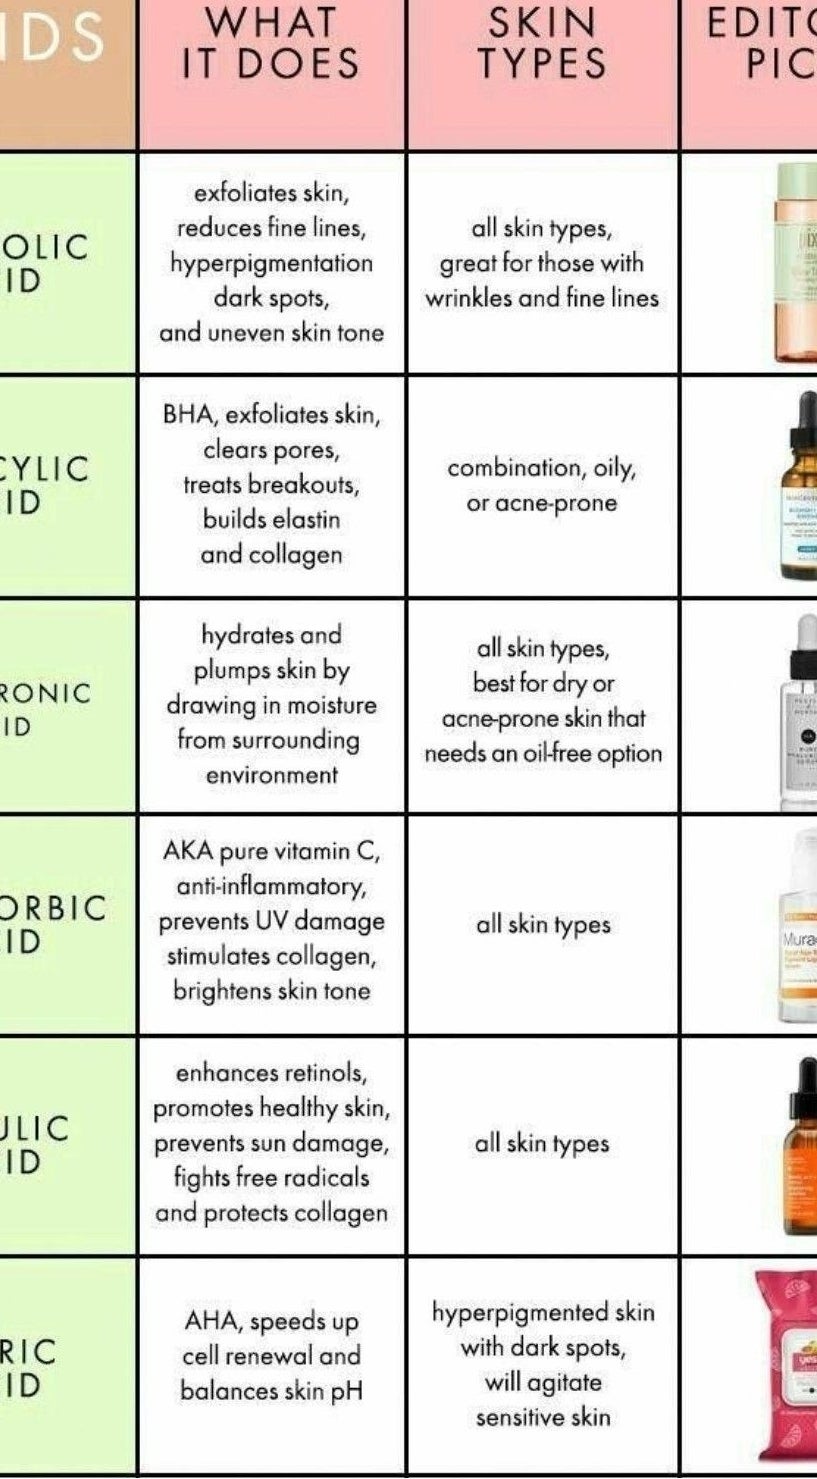 Chart of different types of acid and what they do and which skin types they work for